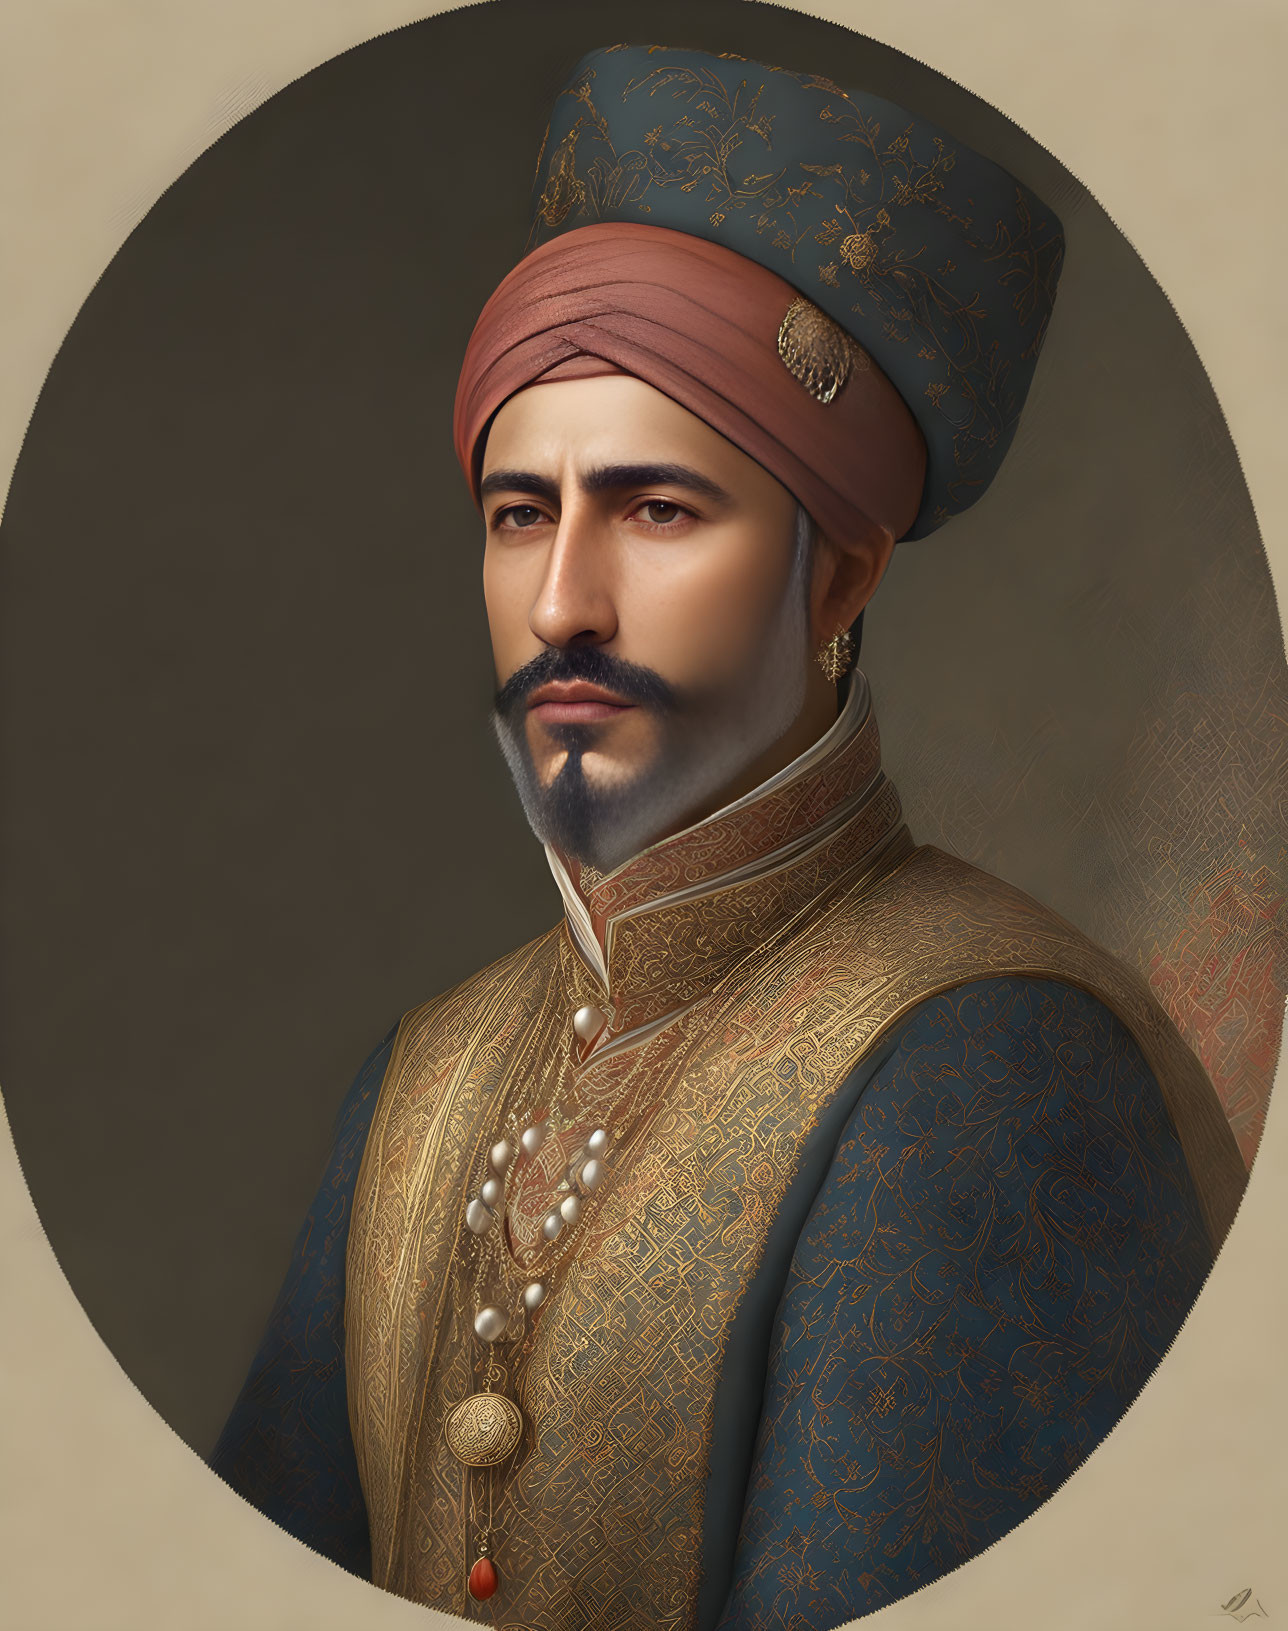 Digital painting of man in historical Ottoman attire with turban and stern expression